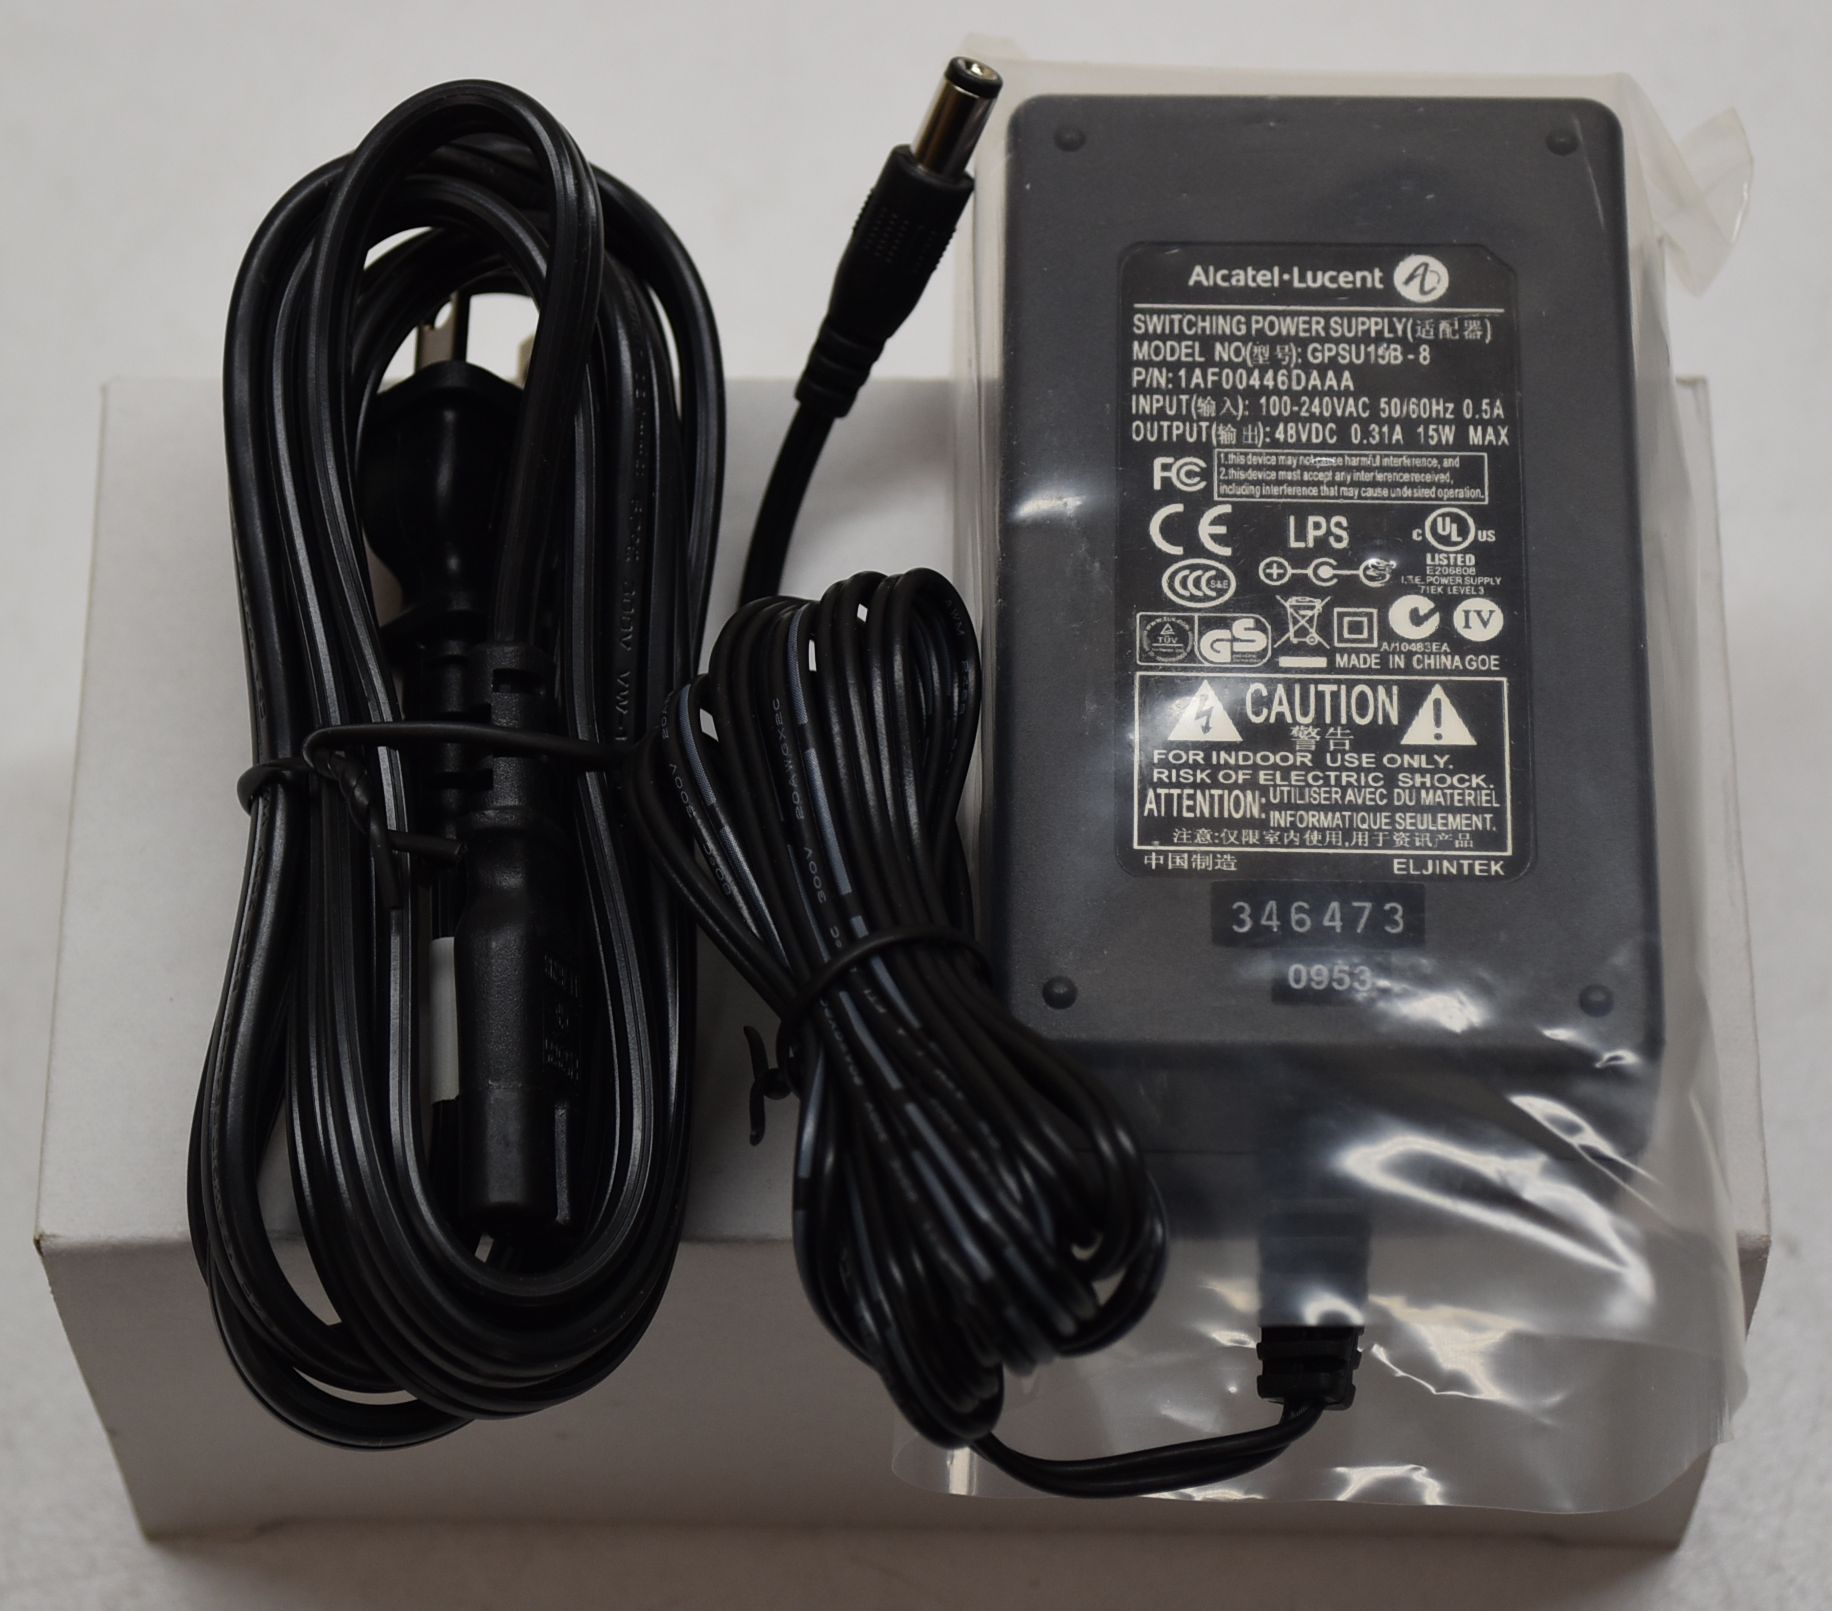 Alcatel Lucent 48VDC Switching Power Supply GPSU15B-8 1AF00446DAAA IPTouch Phone 